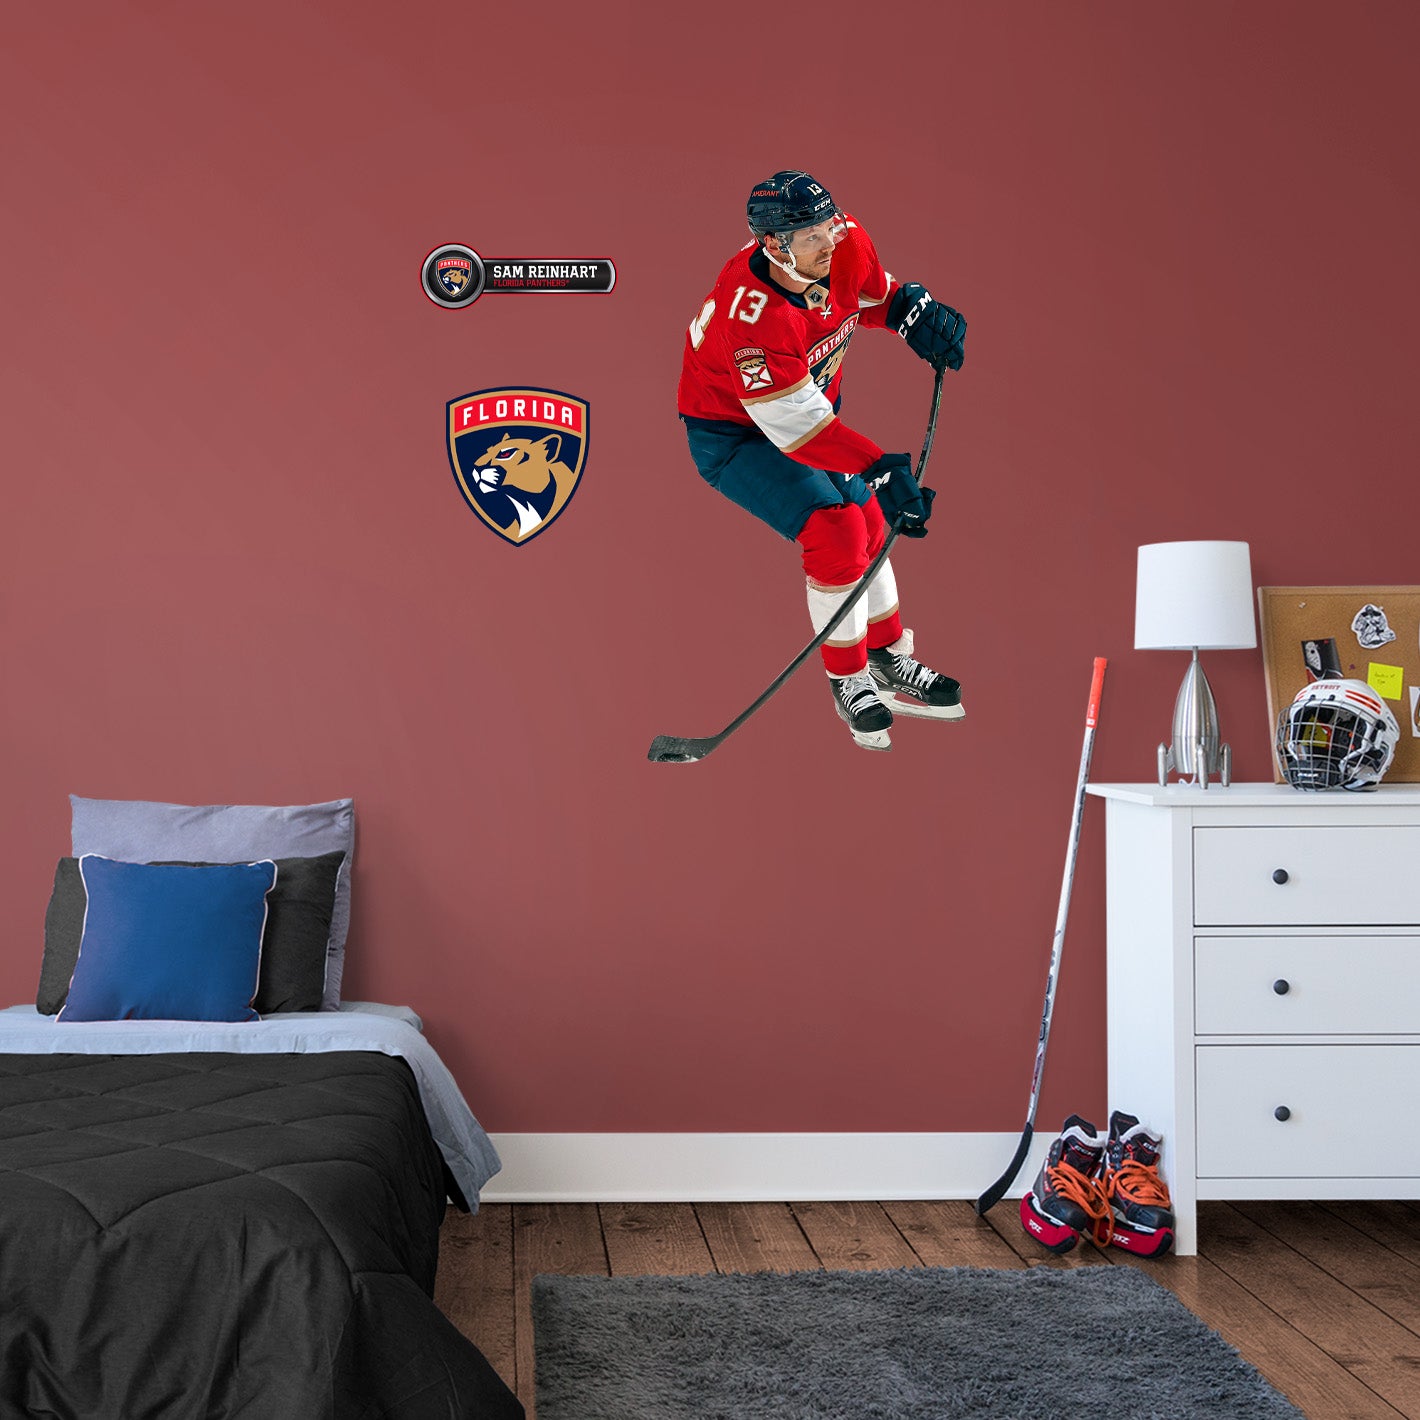 Florida Panthers: Sam Reinhart 2021        - Officially Licensed NHL Removable     Adhesive Decal